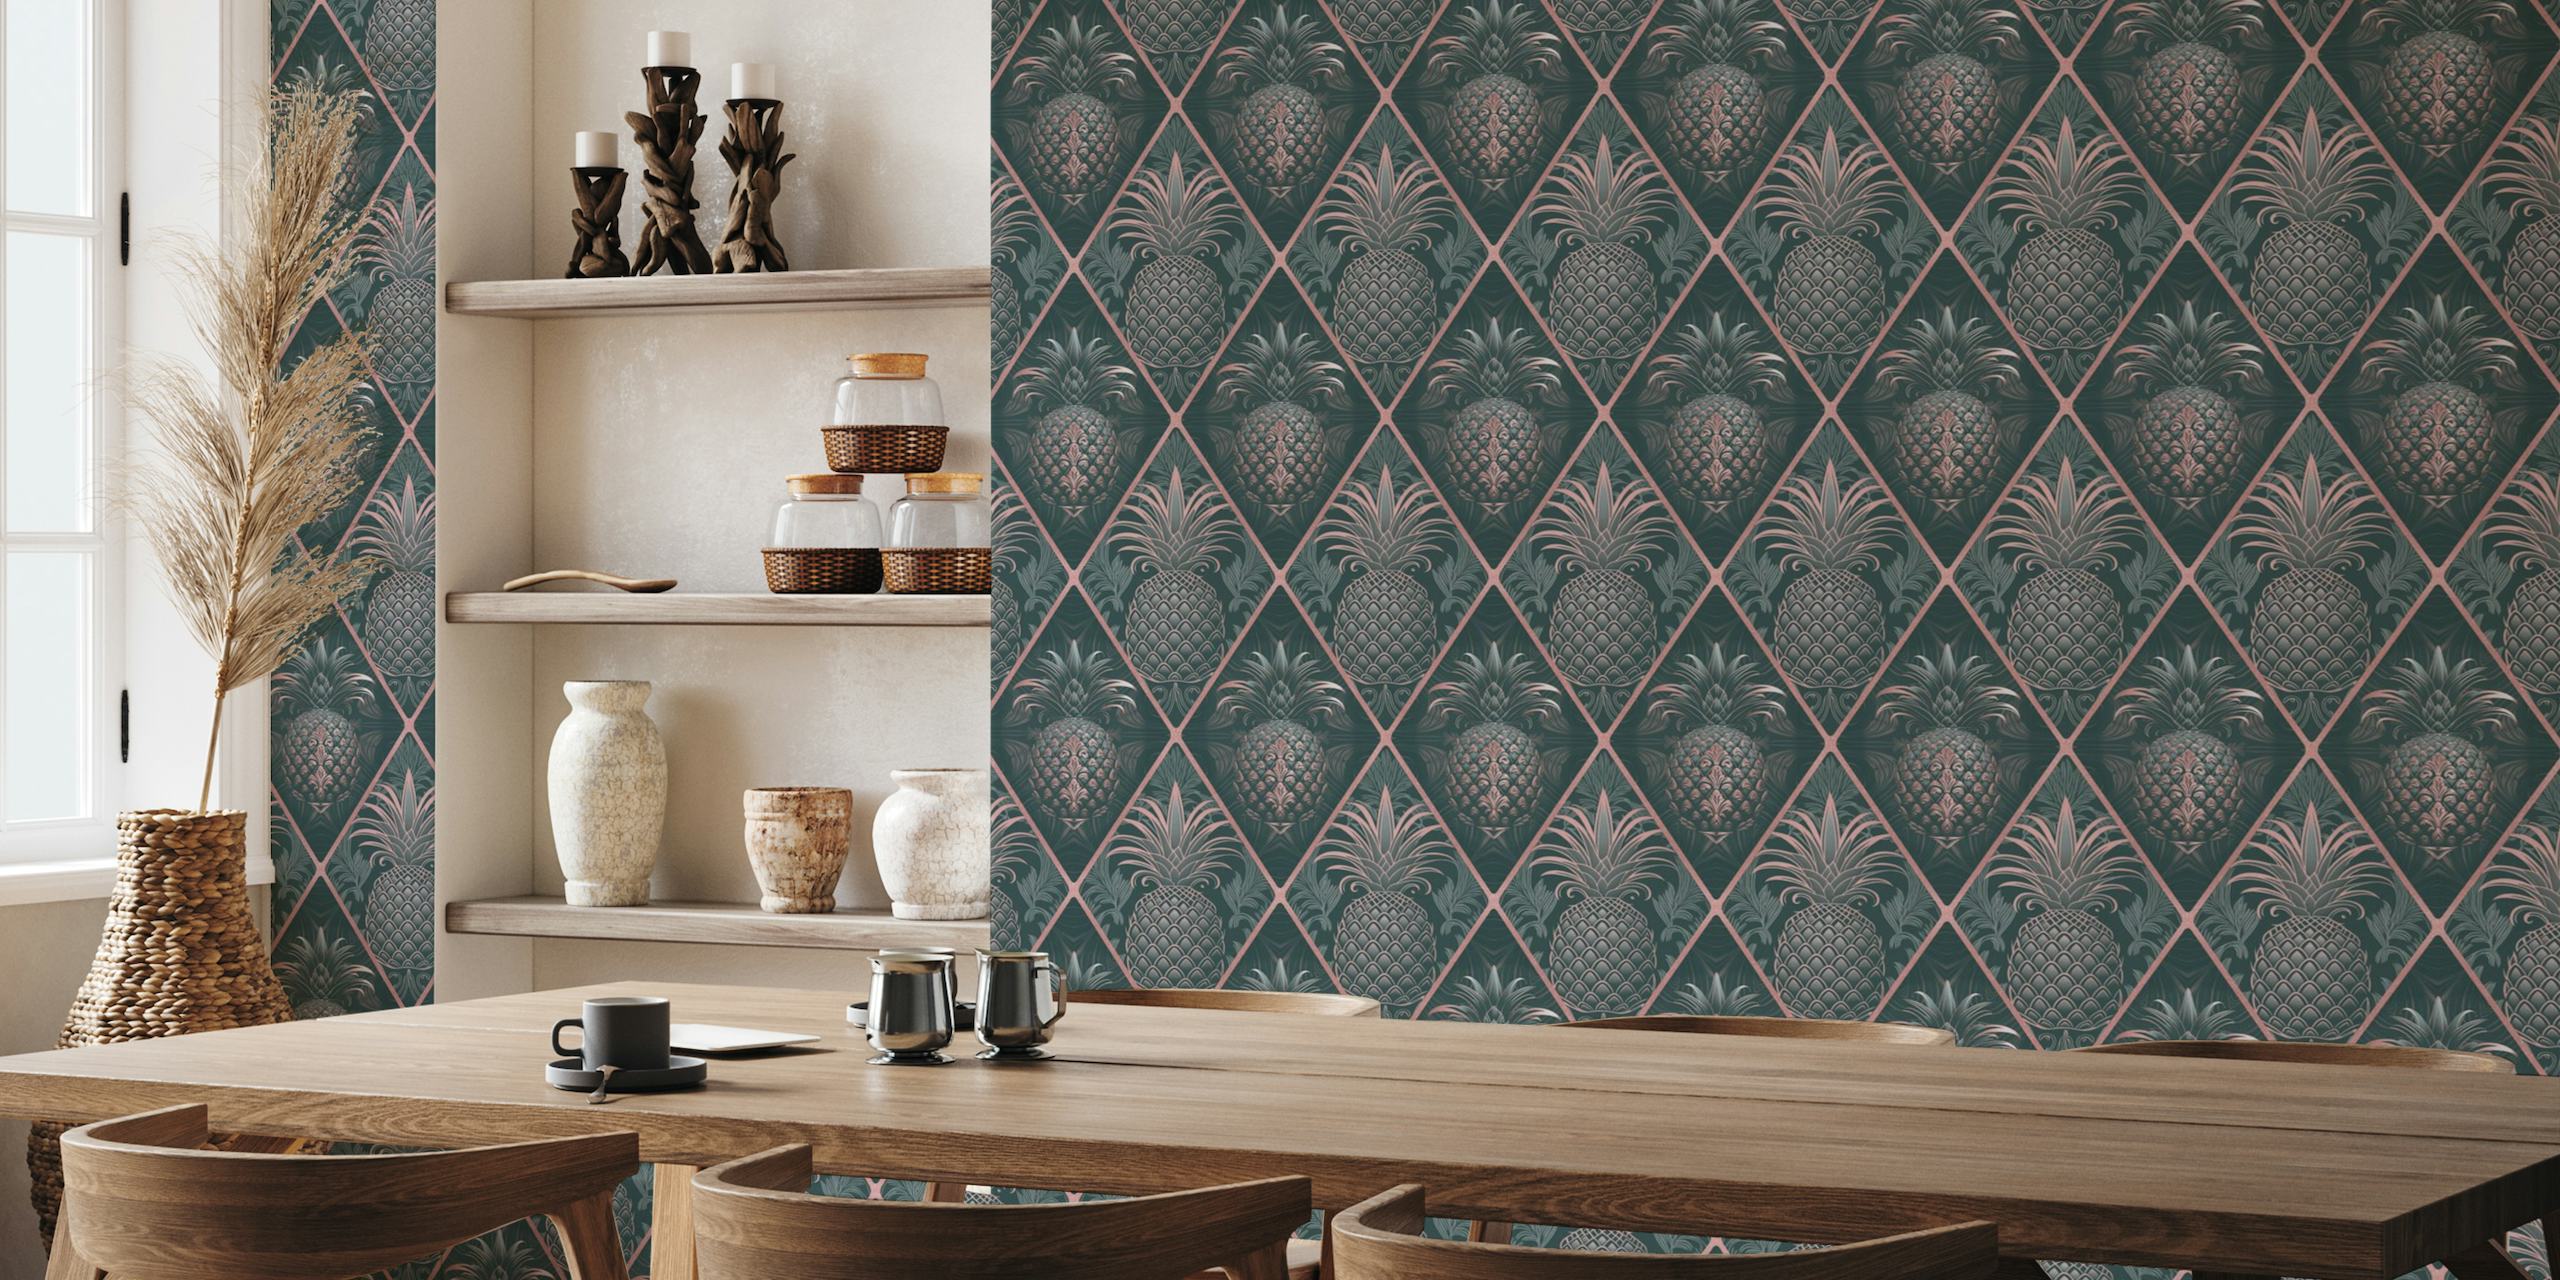 Exquisite Art Deco Design With Pineapple Ornament Teal Pink wallpaper